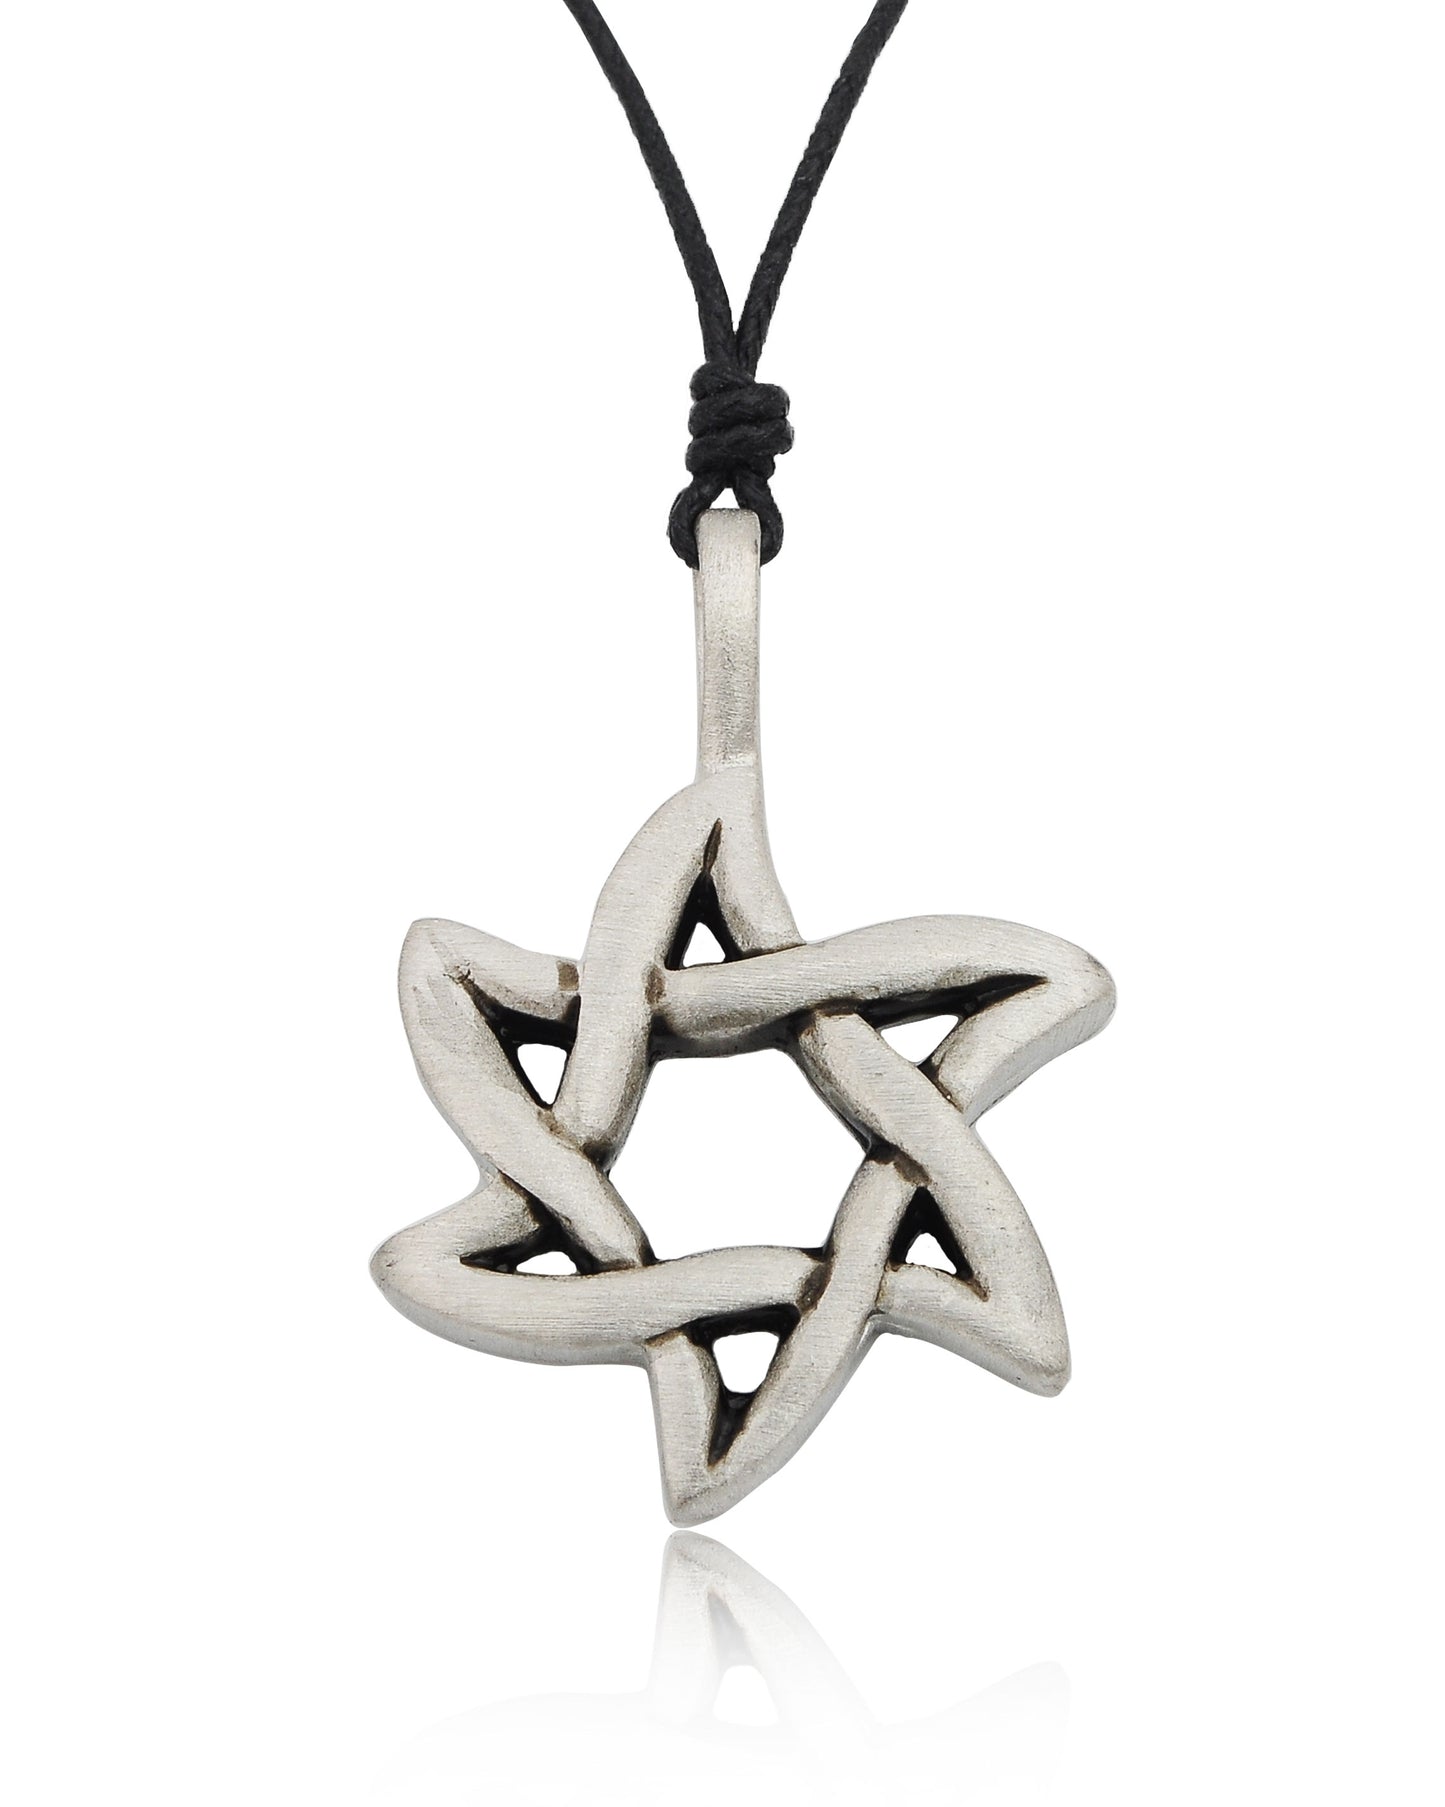 Stunning Jewish Star of David Silver Pewter Charm Necklace Pendant Jewelry